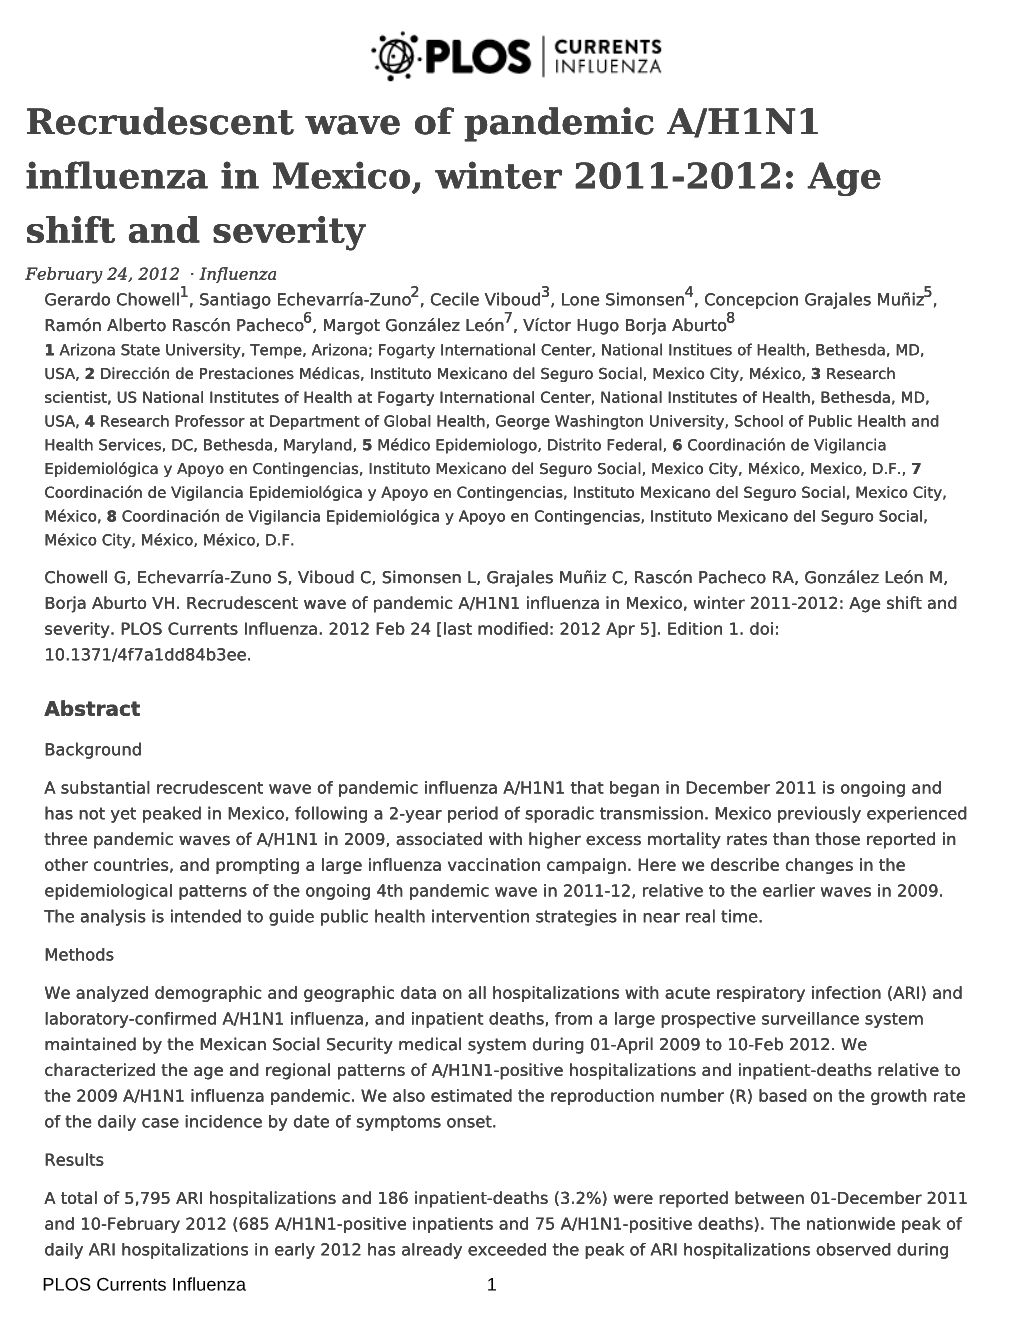 Recrudescent Wave of Pandemic A/H1N1 Influenza in Mexico, Winter 2011-2012: Age Shift and Severity